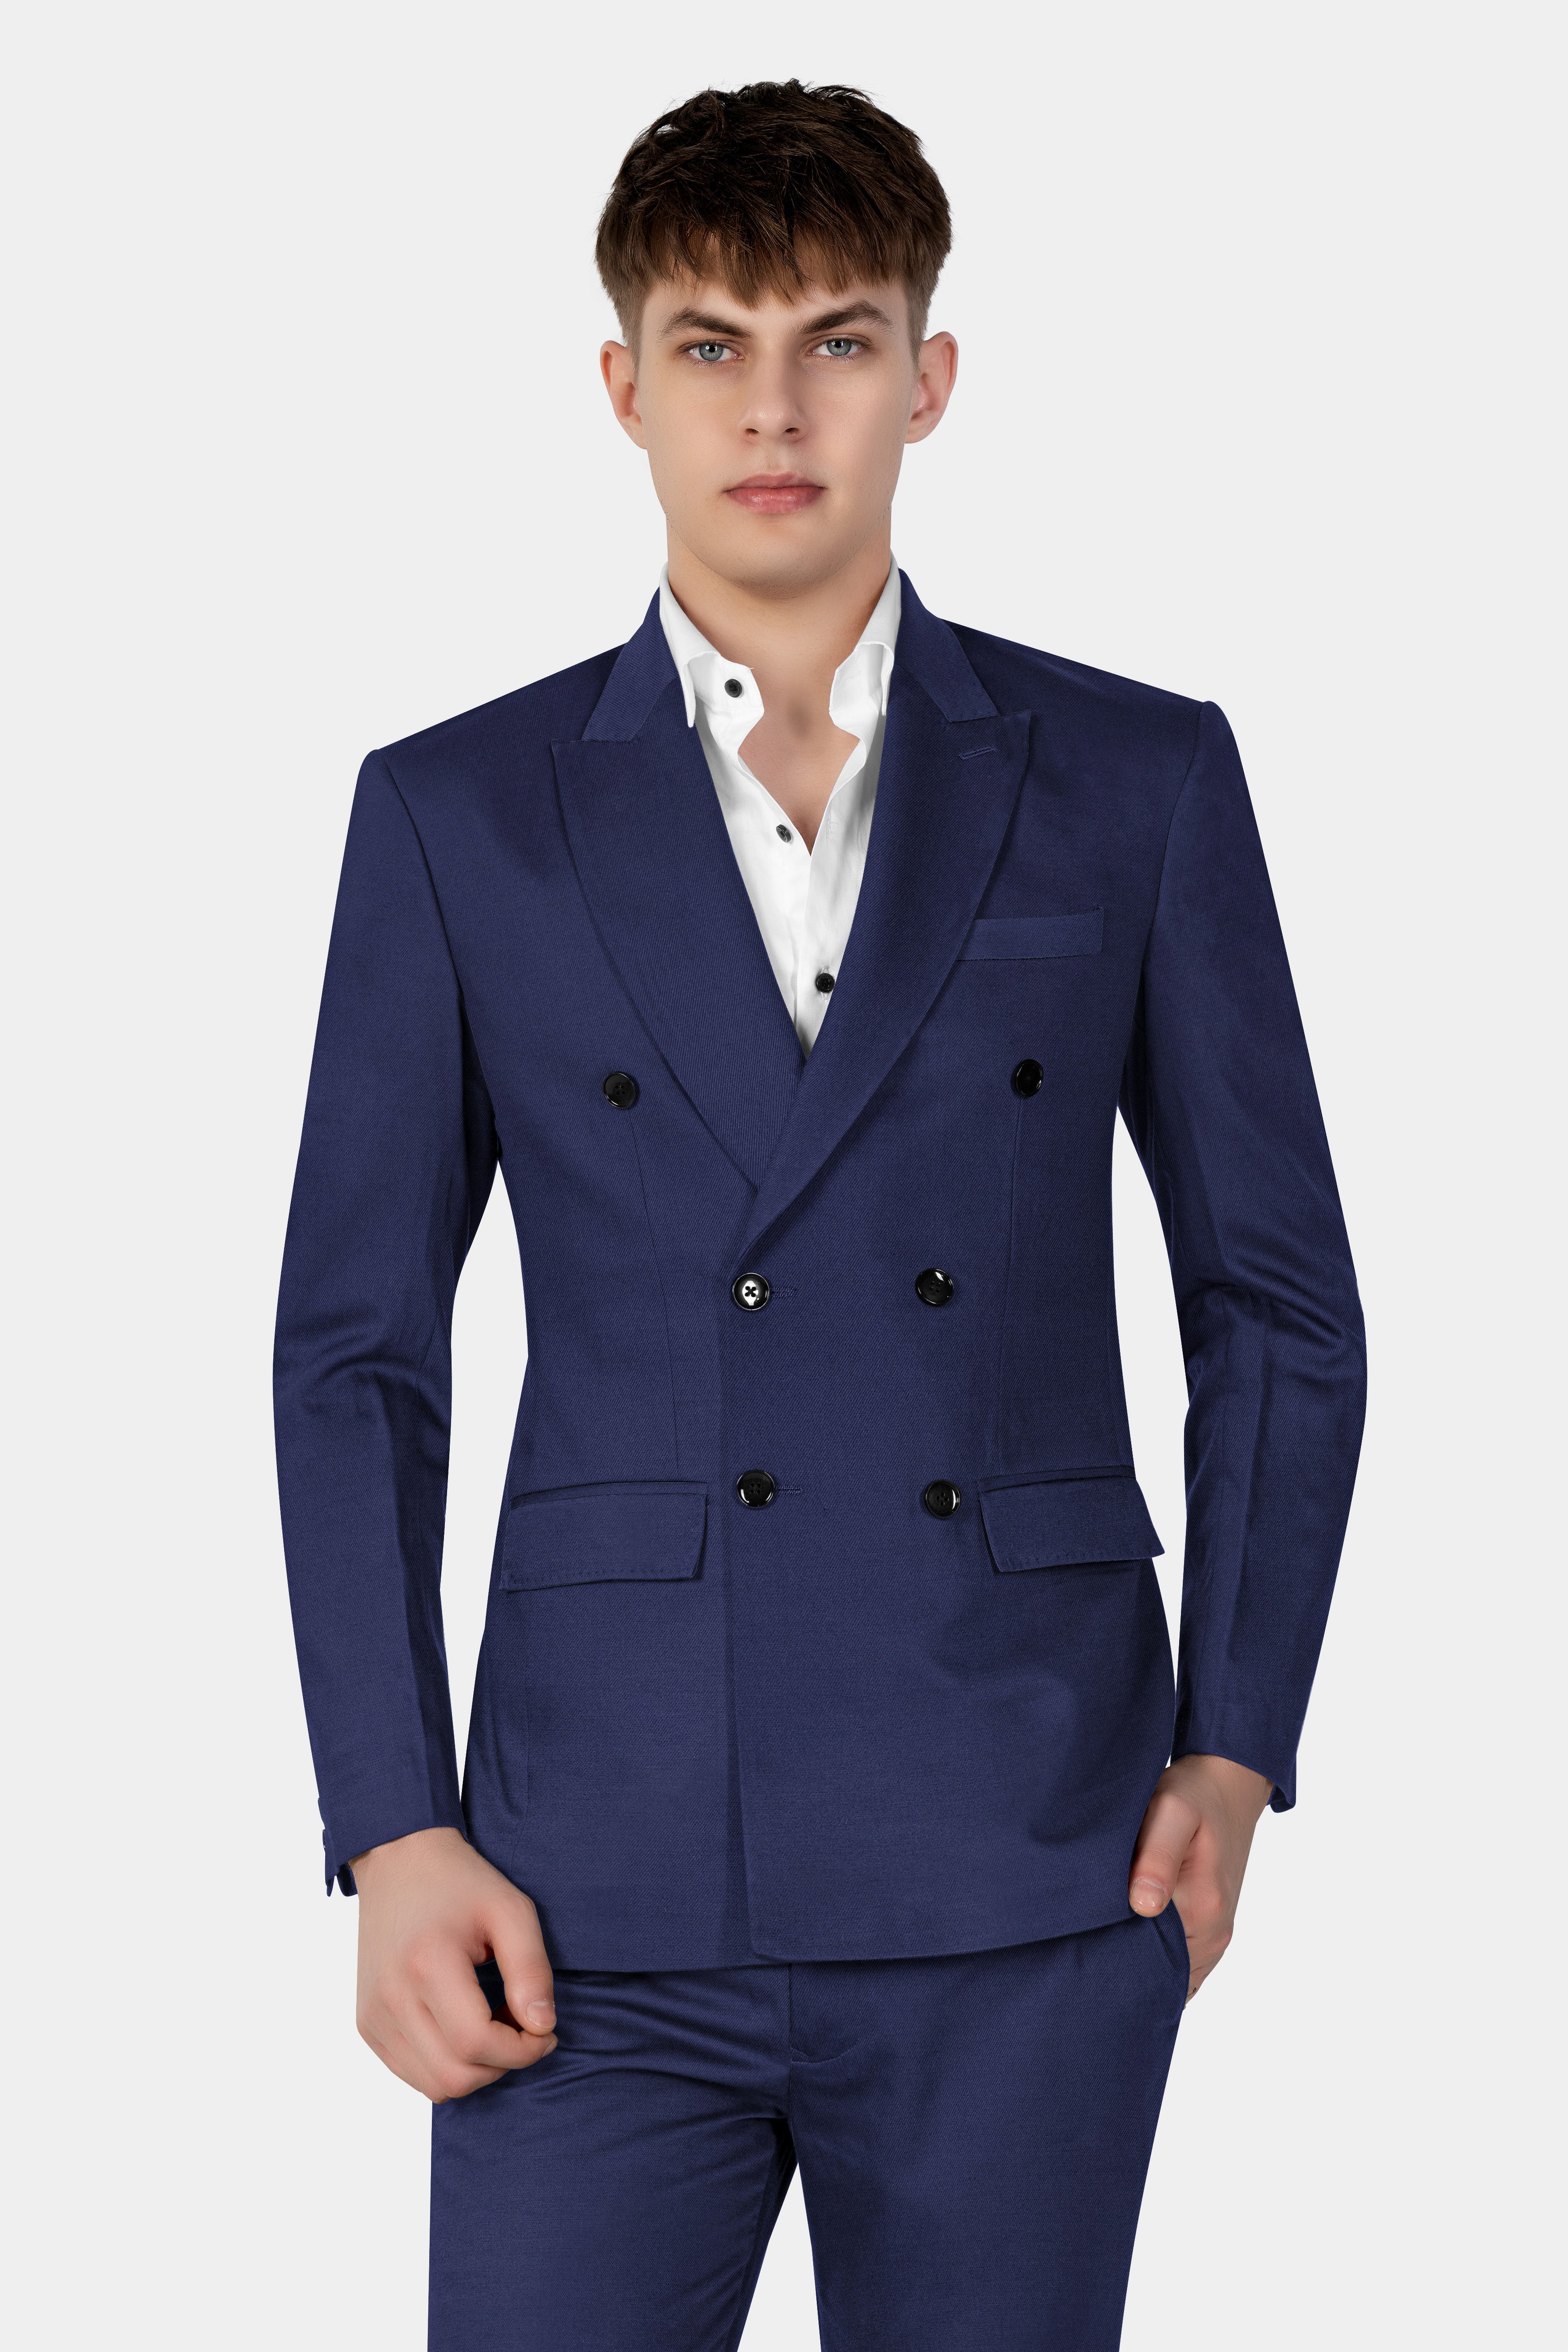 Tealish Blue Plain Solid Wool Blend Double Breasted Blazer